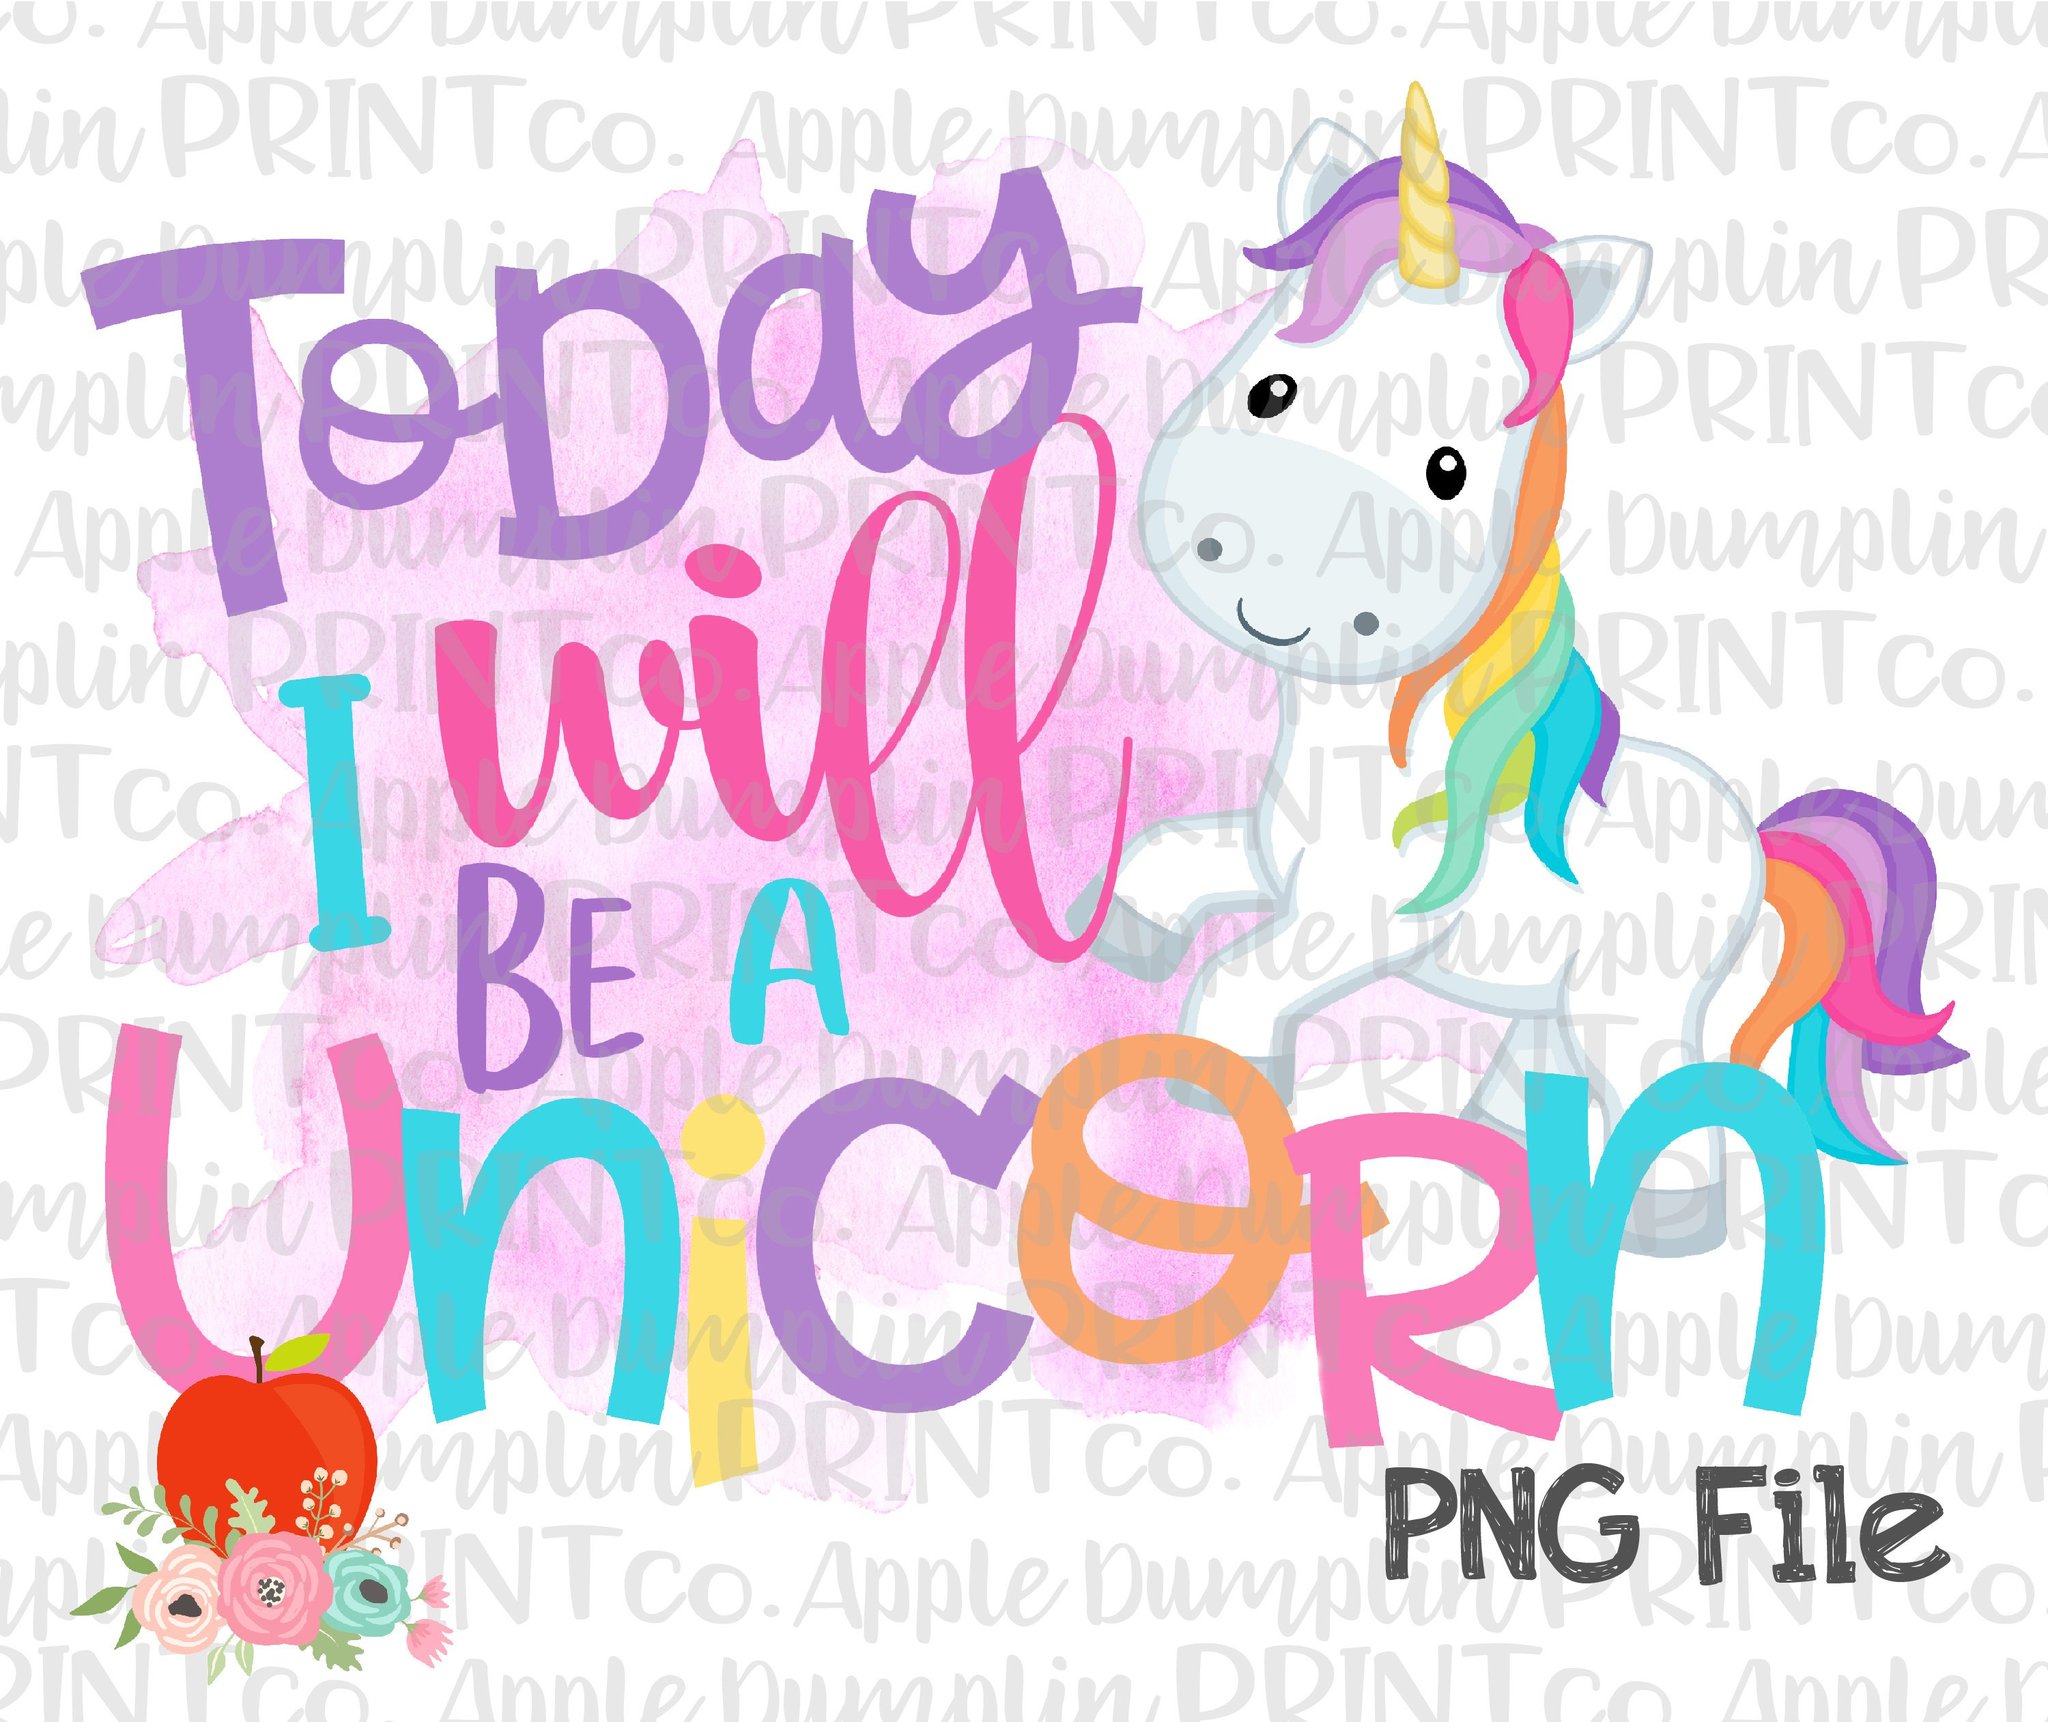 Today I Will Be a Unicorn Watercolor Printable Design PNG